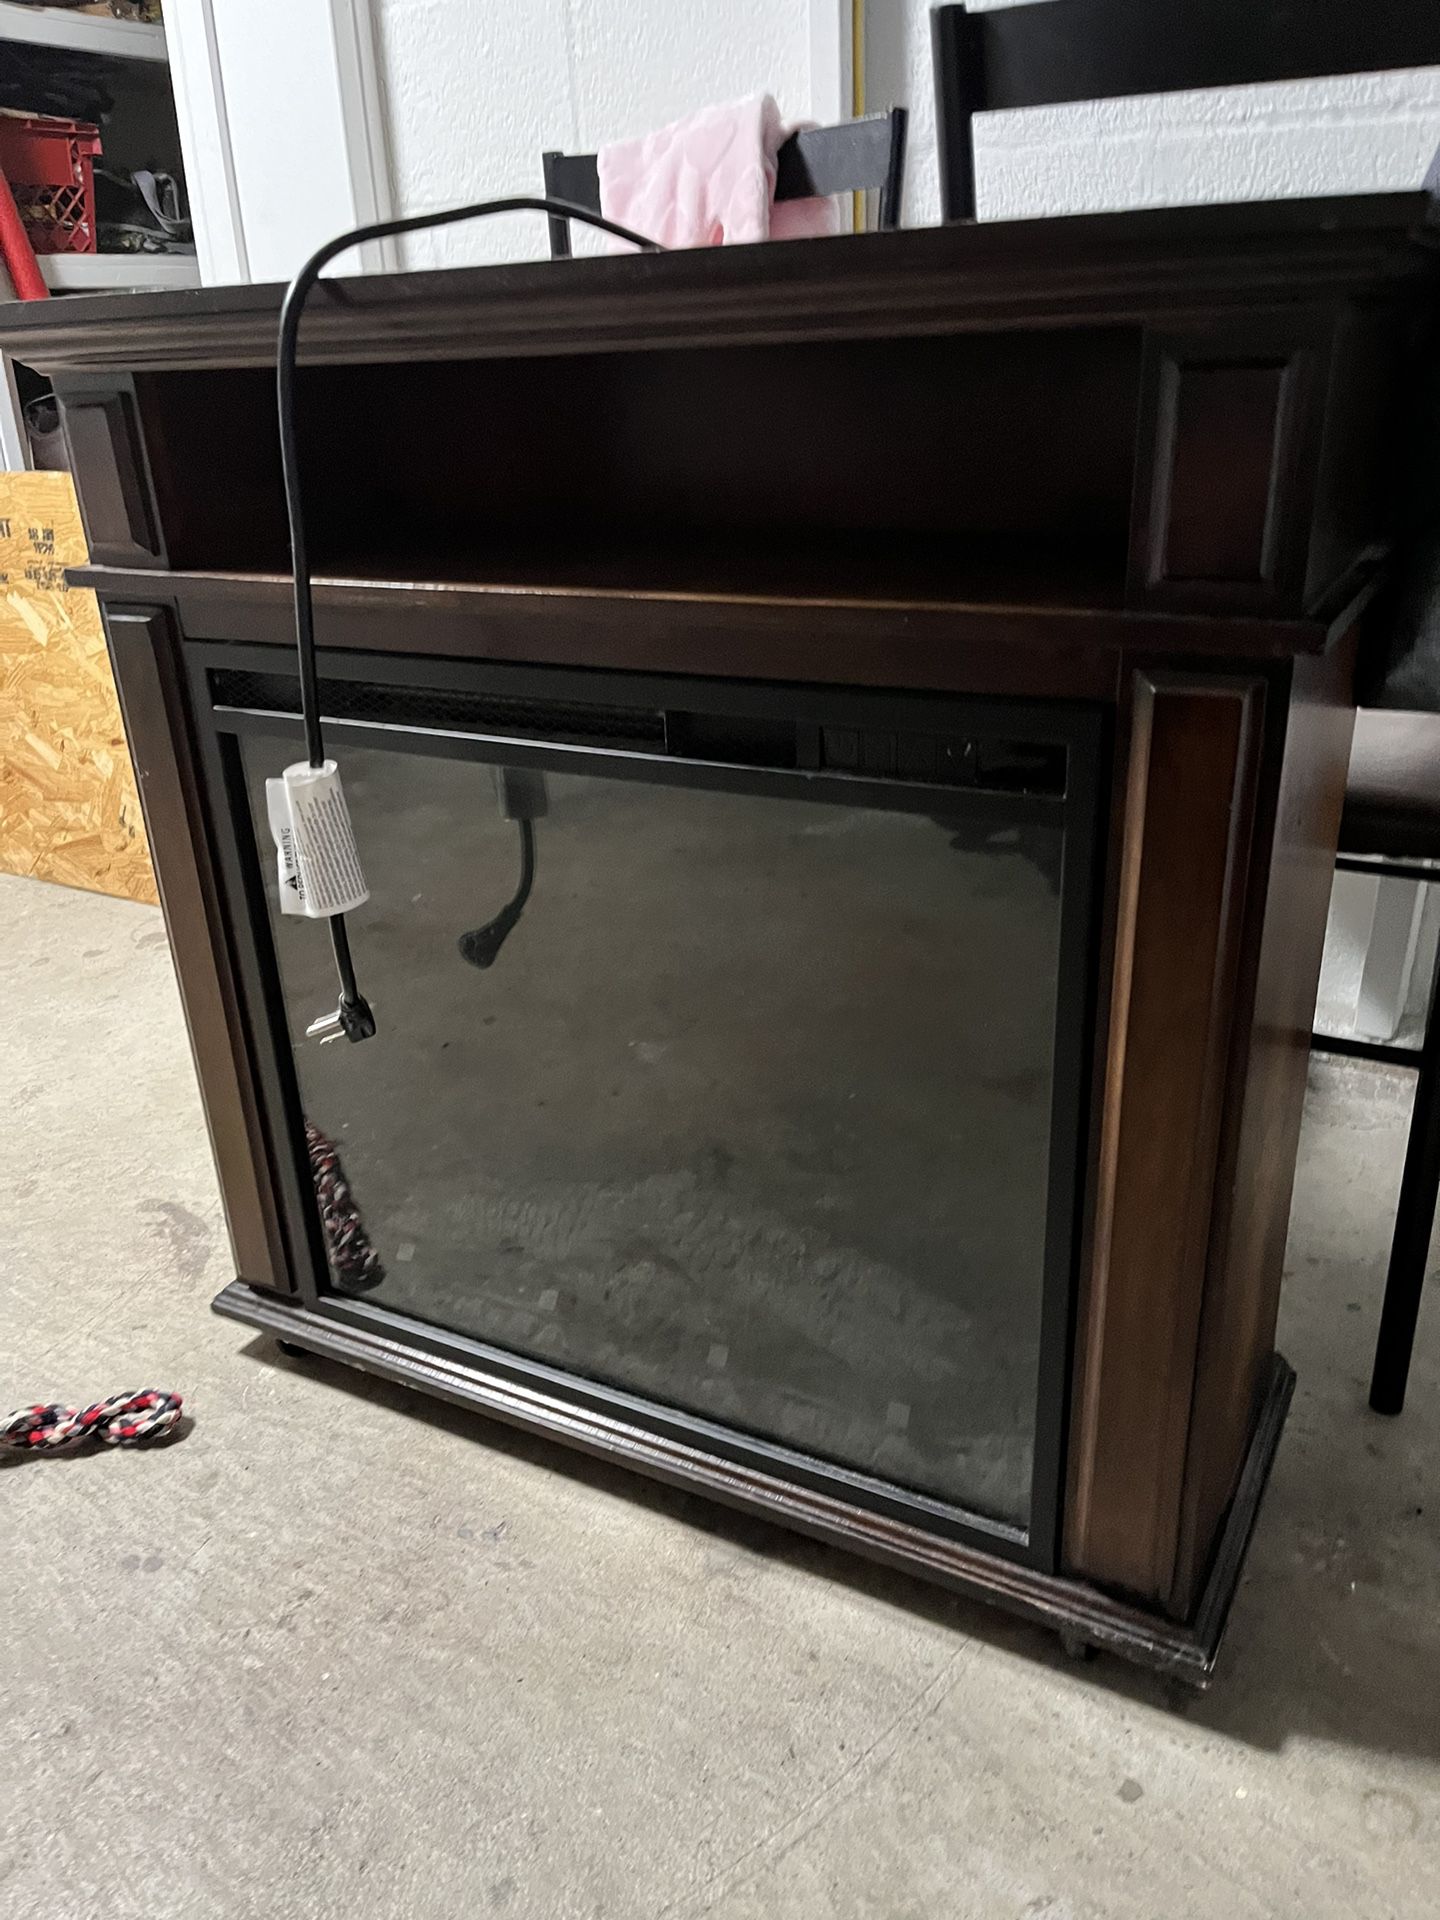 Fireplace for sale